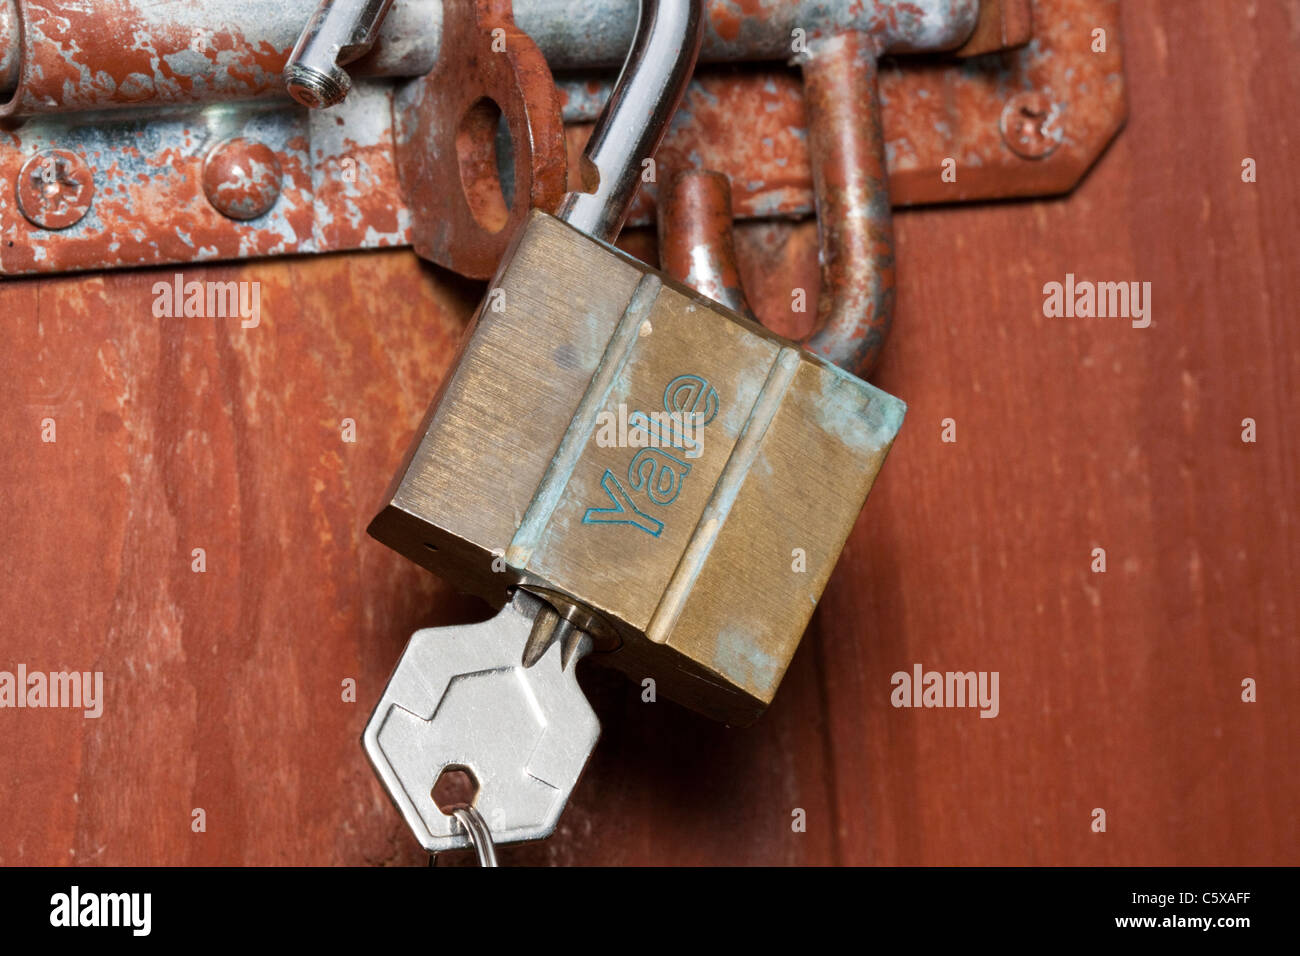 Unlocked padlock and key on a shed door illustrating garden security Stock Photo